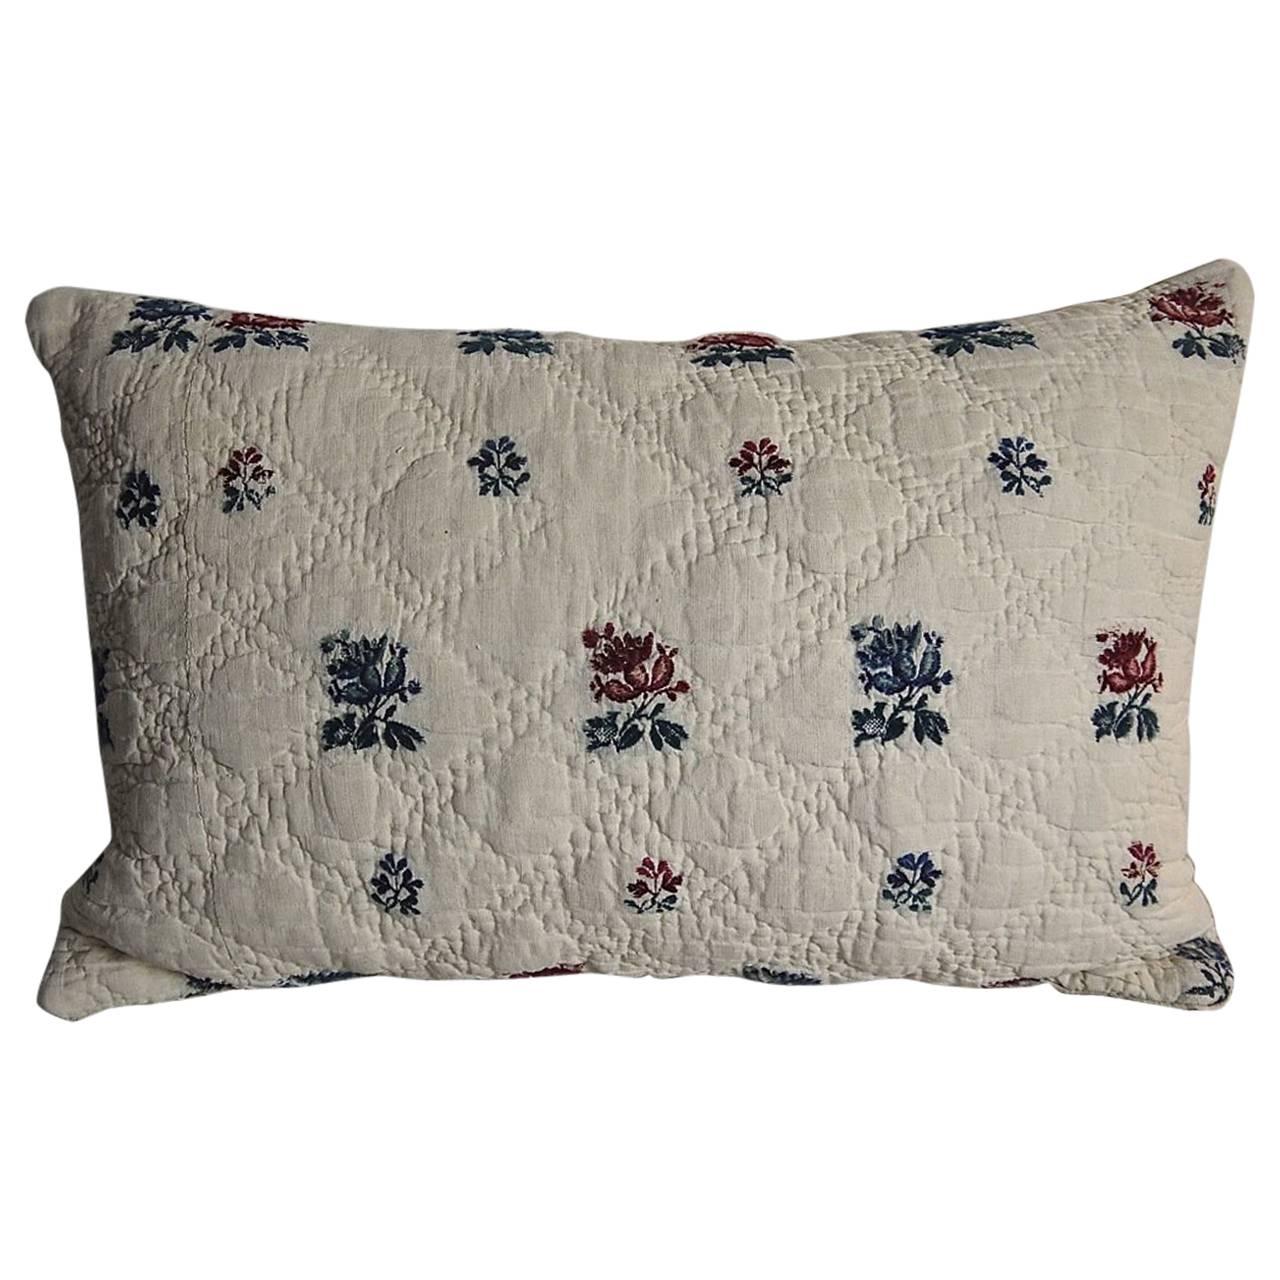 Late 18th Century French Antique Wool Woven on Linen Flower Motif Pillow